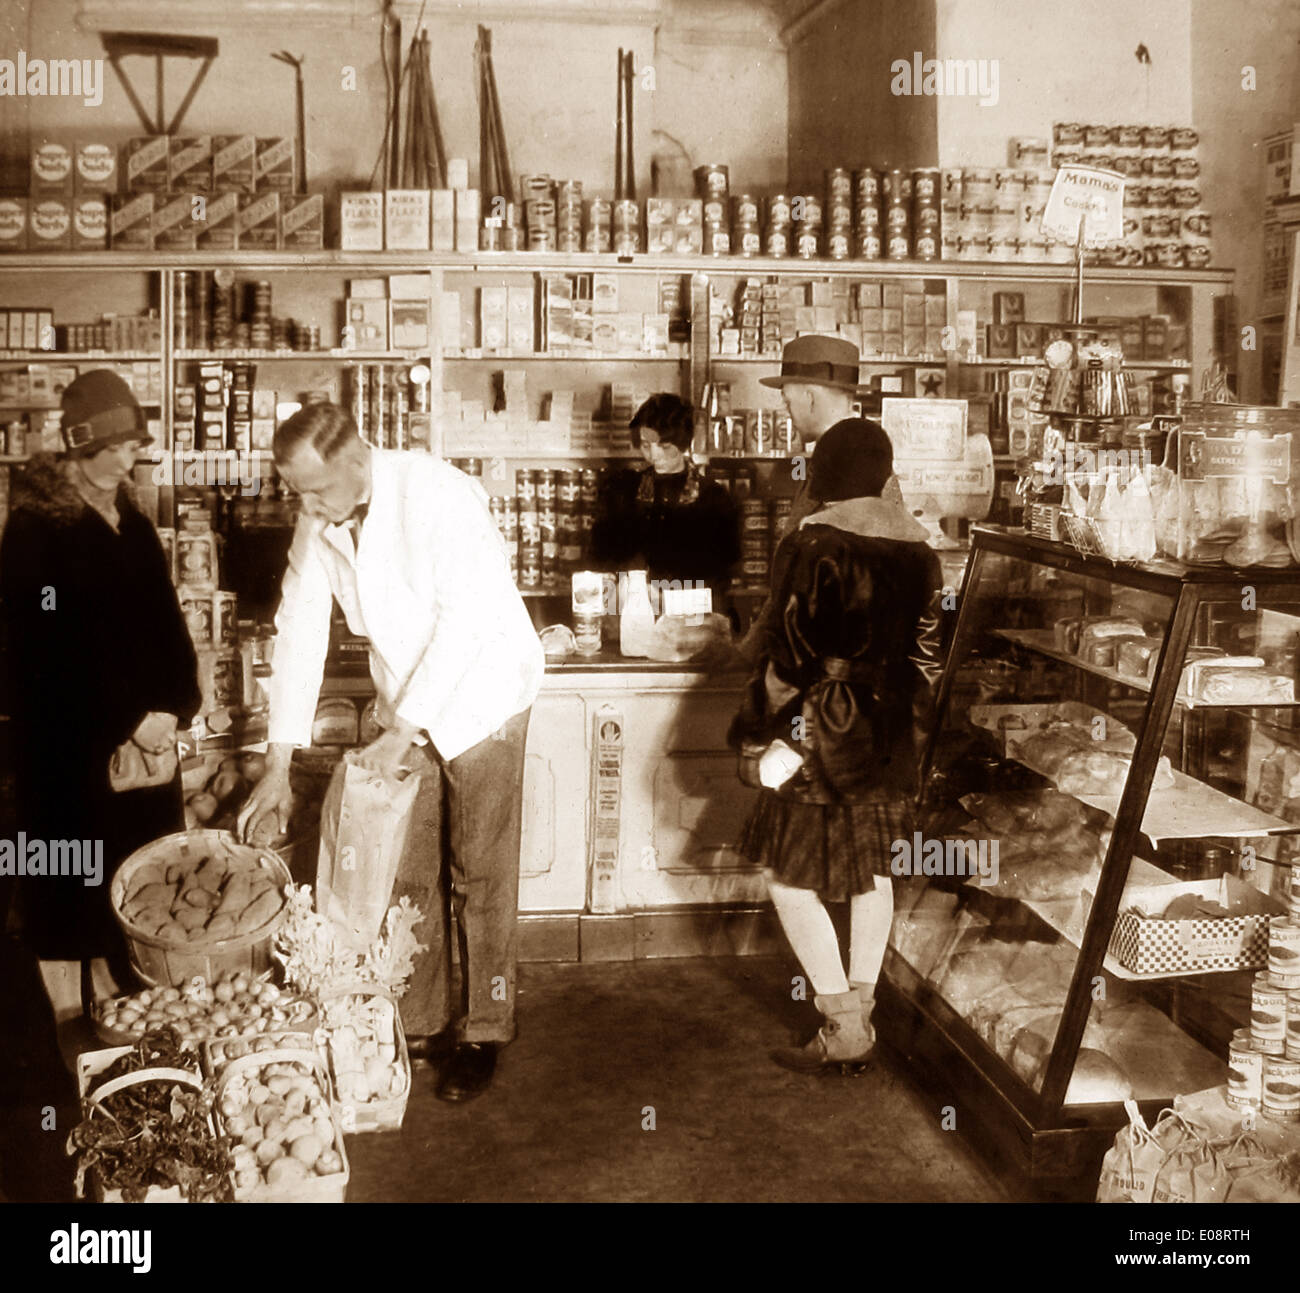 An American grocery store probably 1930s Stock Photo